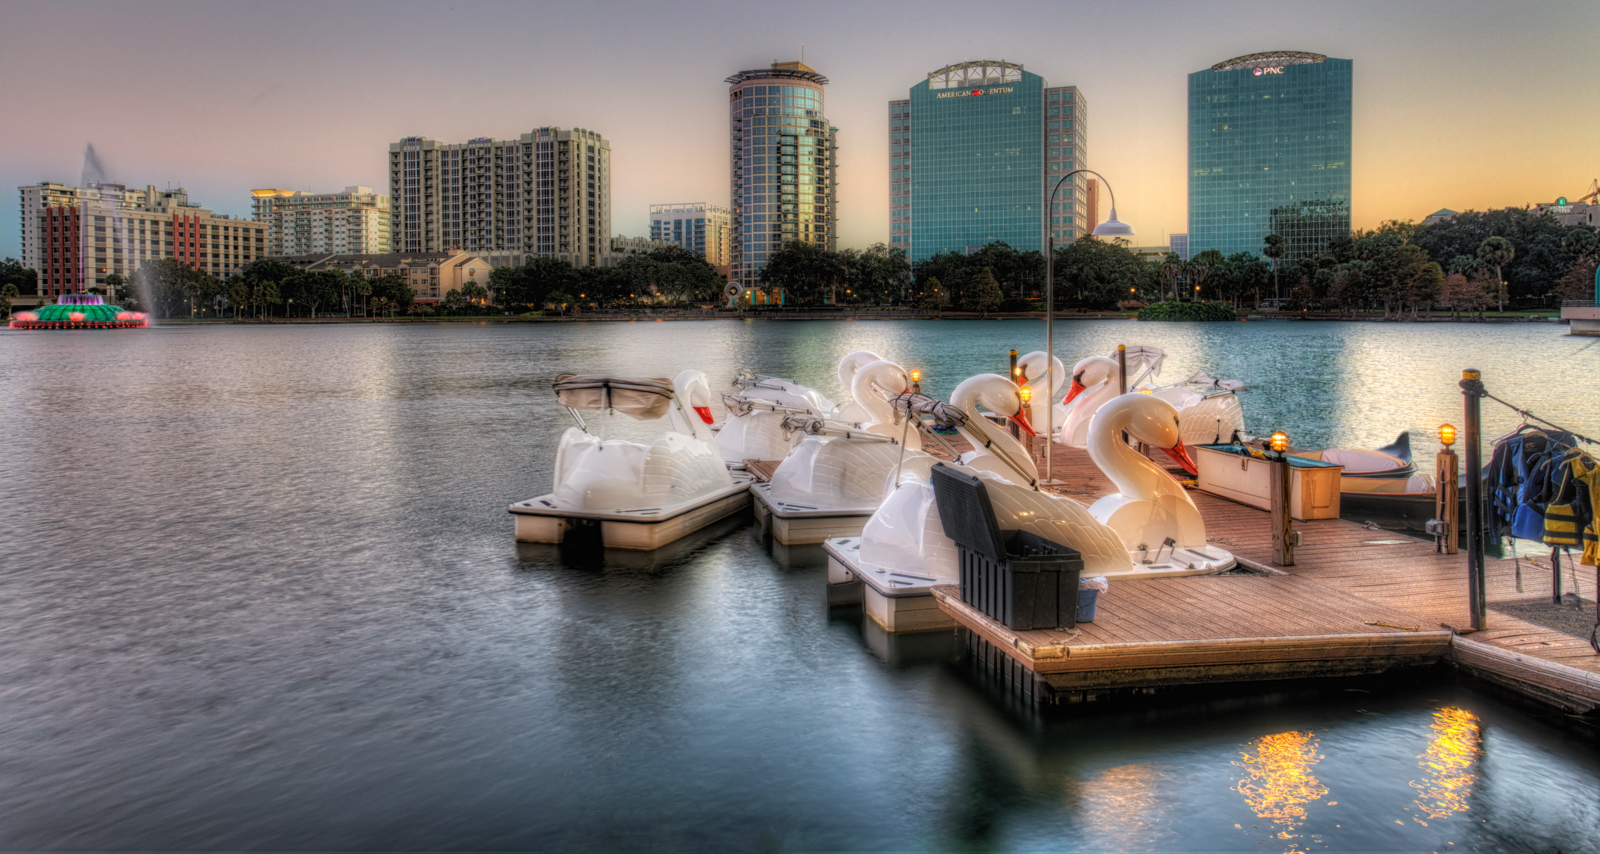 Lake Eola Swanboats and Fountain